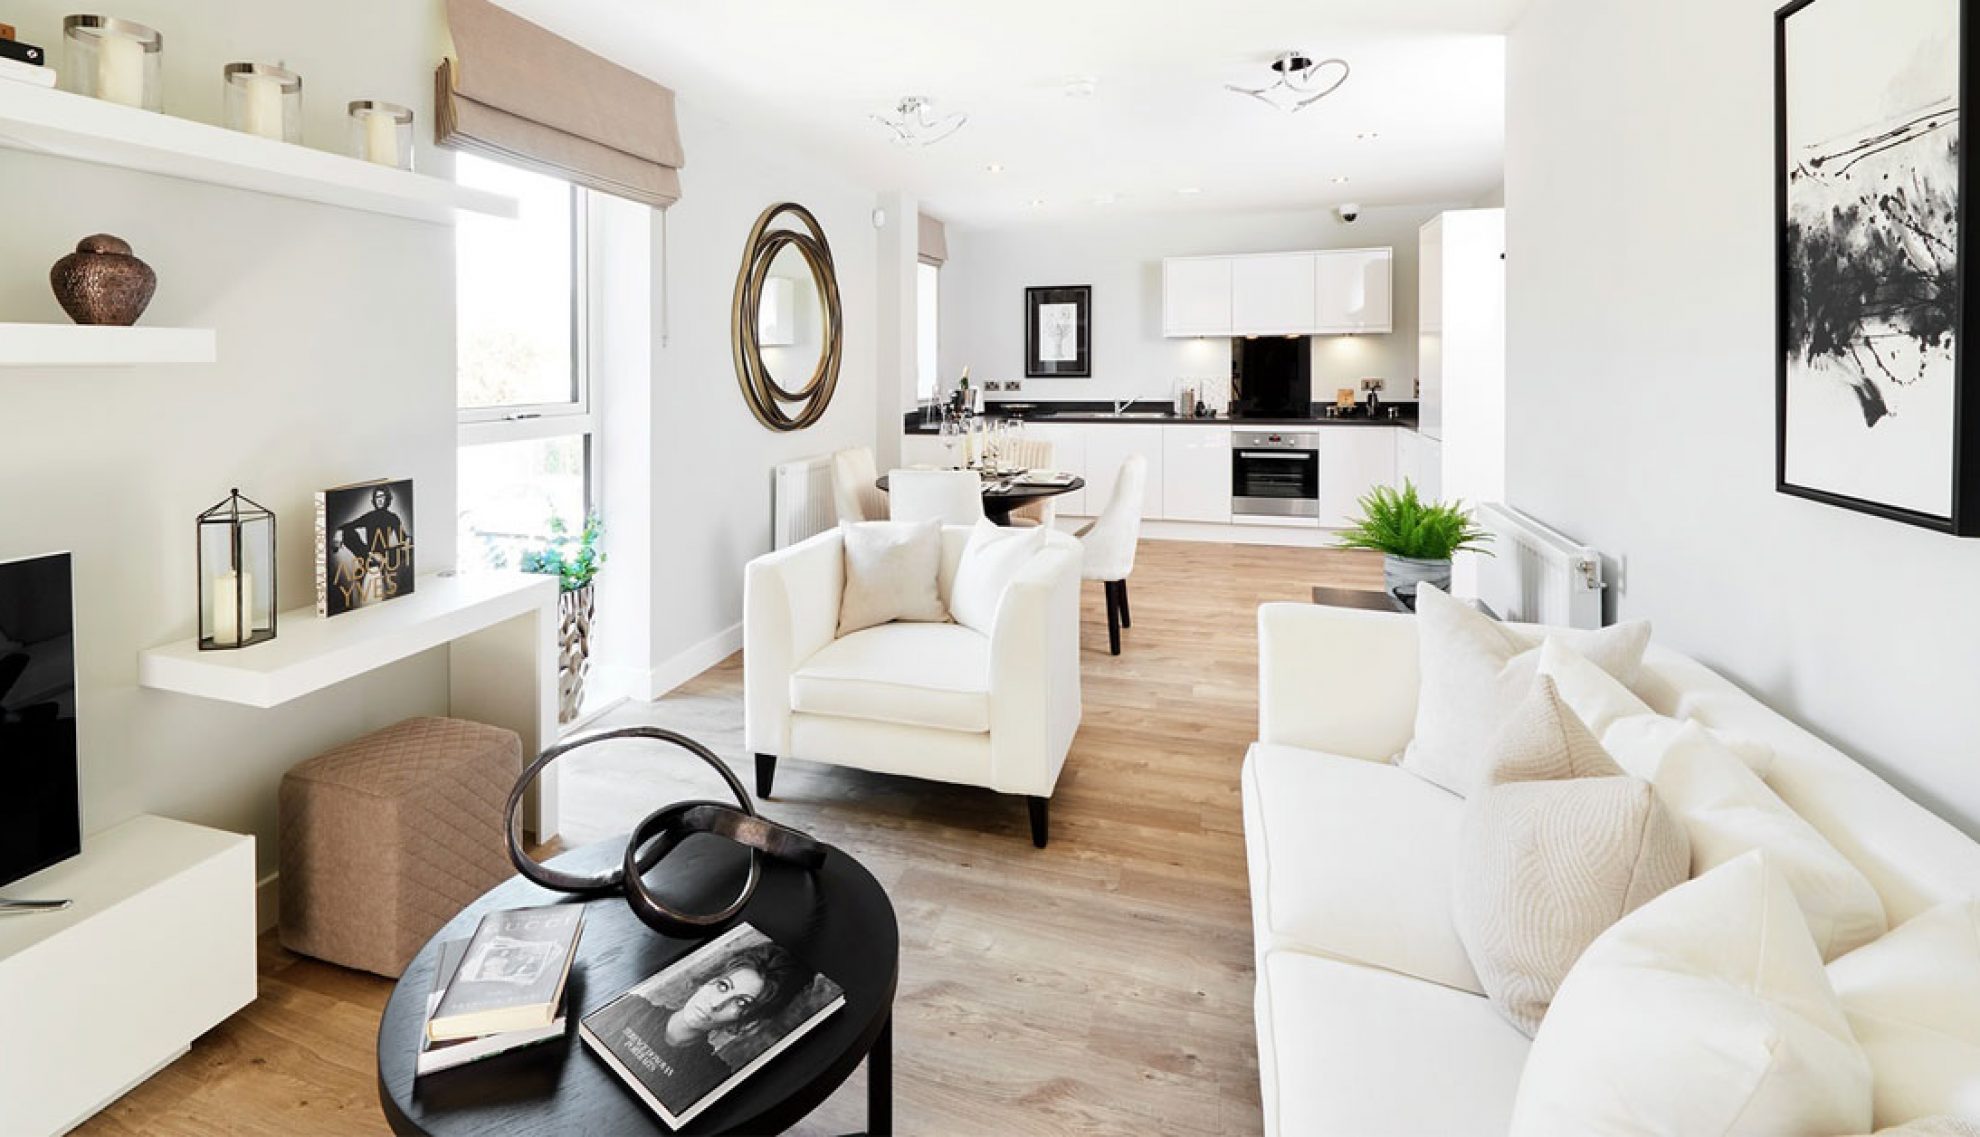 Fairview new build homes in Bromley